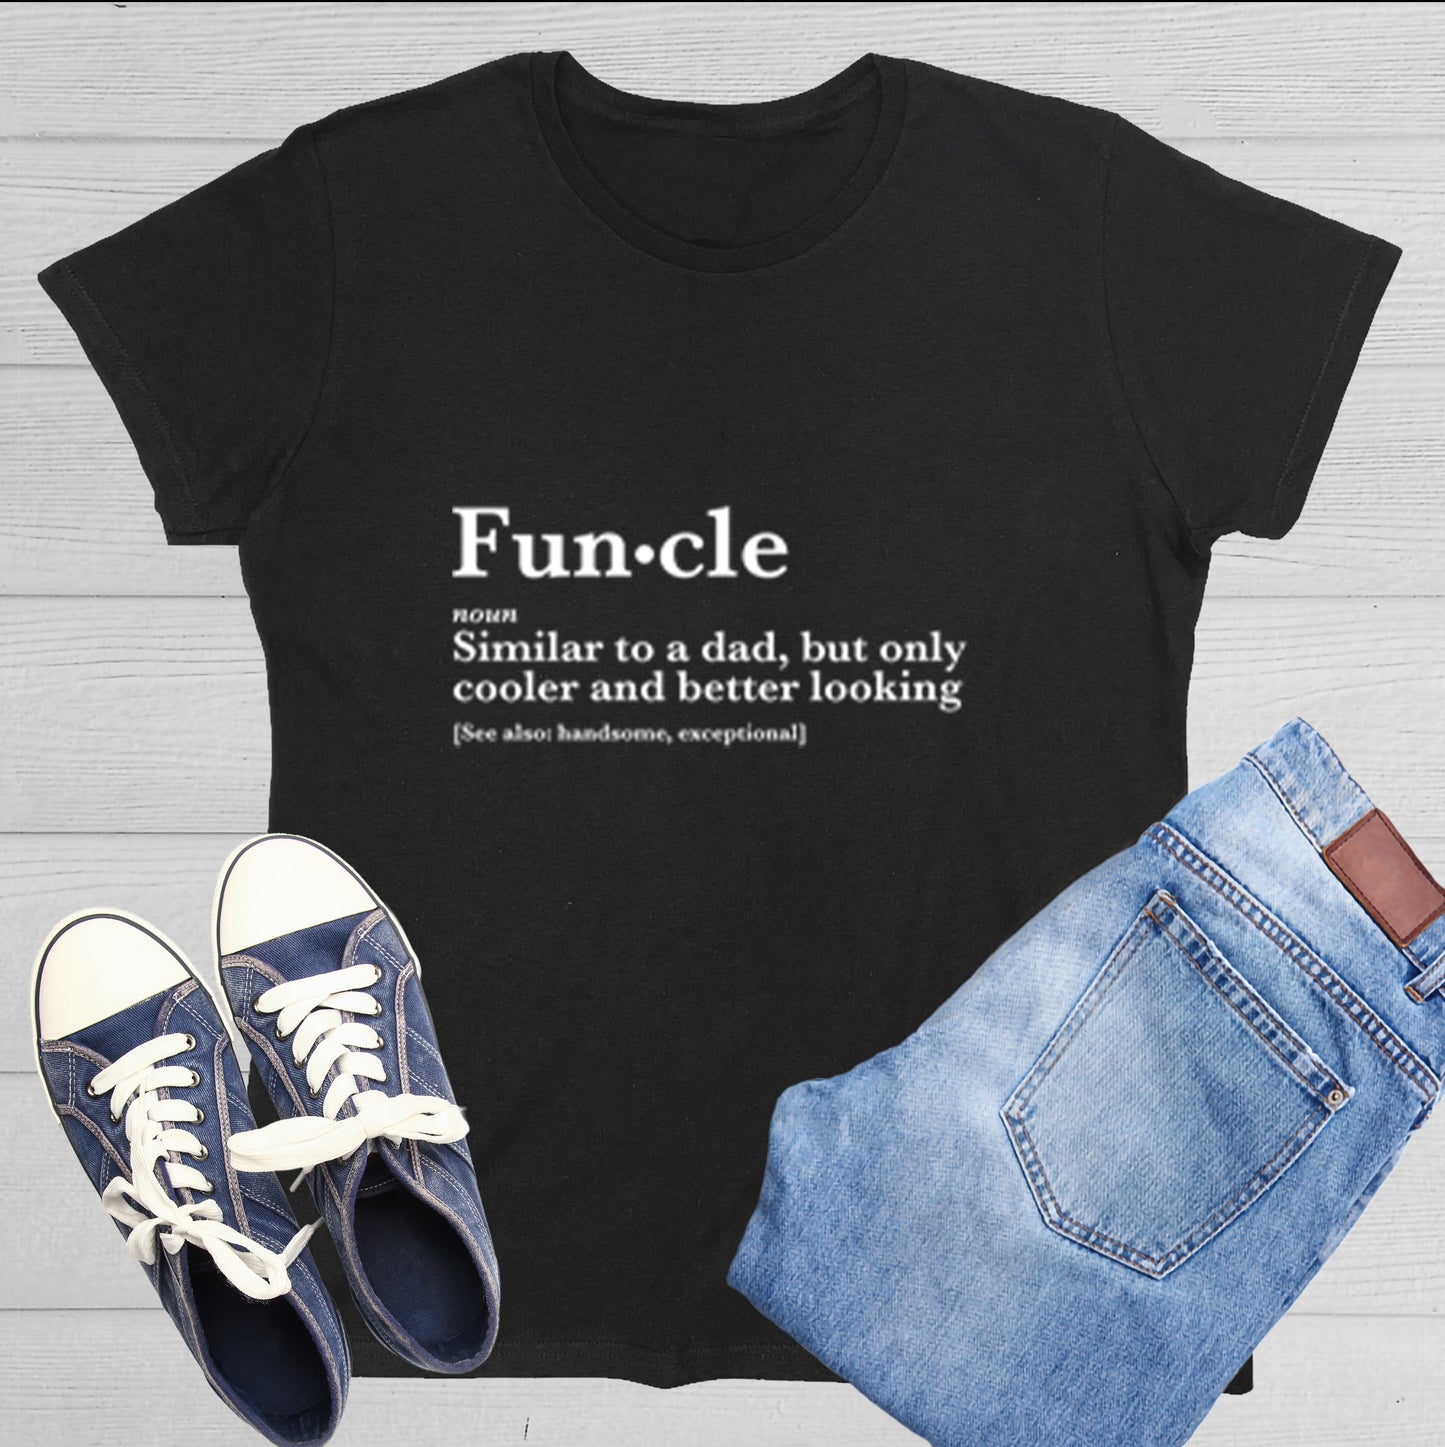 Funny T-Shirts design "Funcle Similar To A Dad, But Only Cooler And Better Looking."